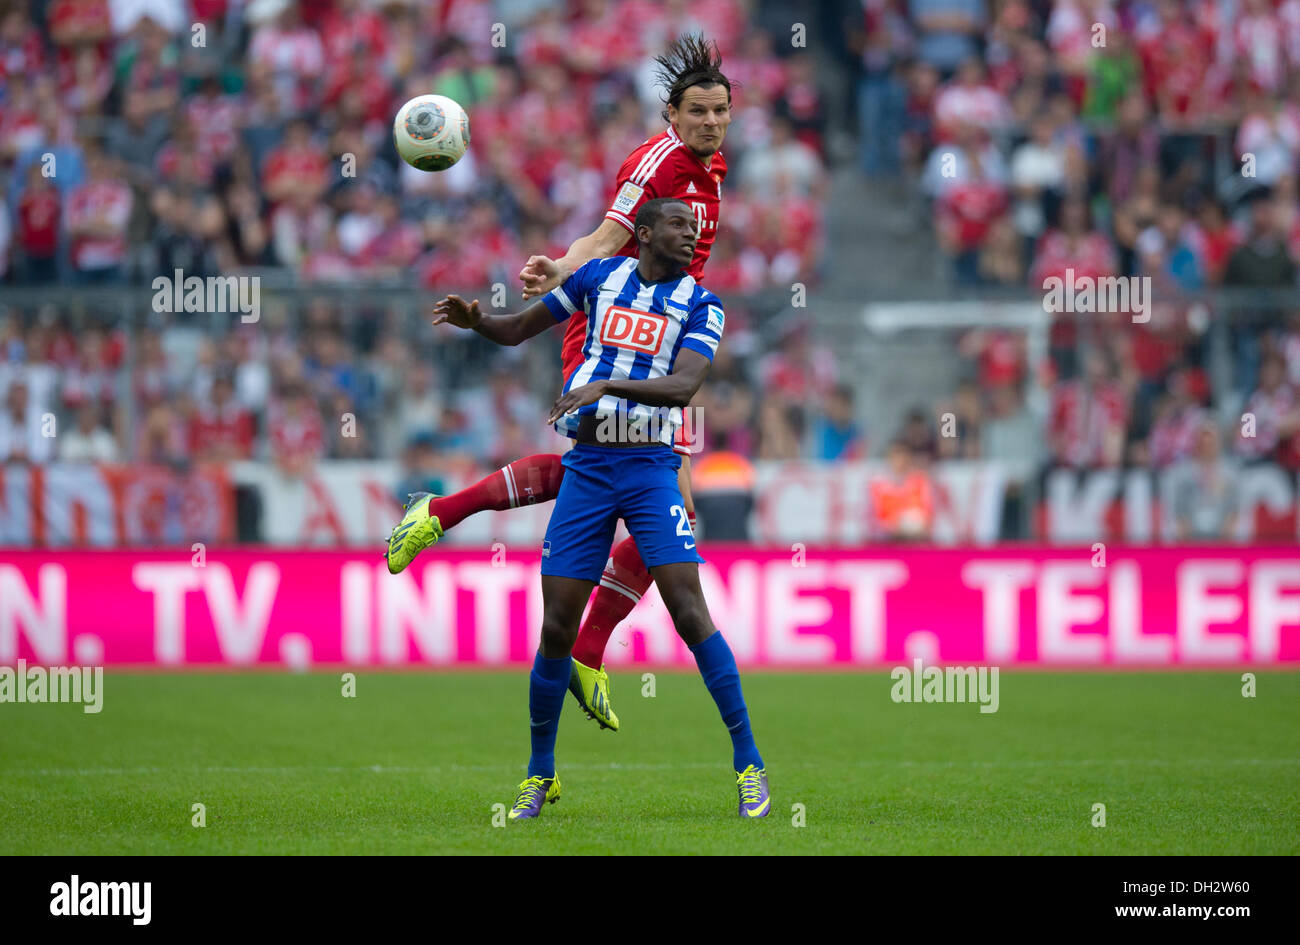 Munich, Germany. 26th Oct, 2013. Munich's Daniel van Buyten (A) vies for the ball with Berlin's Adrian Ramos during the German Bundesliga match between FC Bayern Munich and Hertha BSC at Allianz Arena in Munich, Germany, 26 October 2013. Photo: THOMAS EISENHUTH/dpa/Alamy Live News Stock Photo